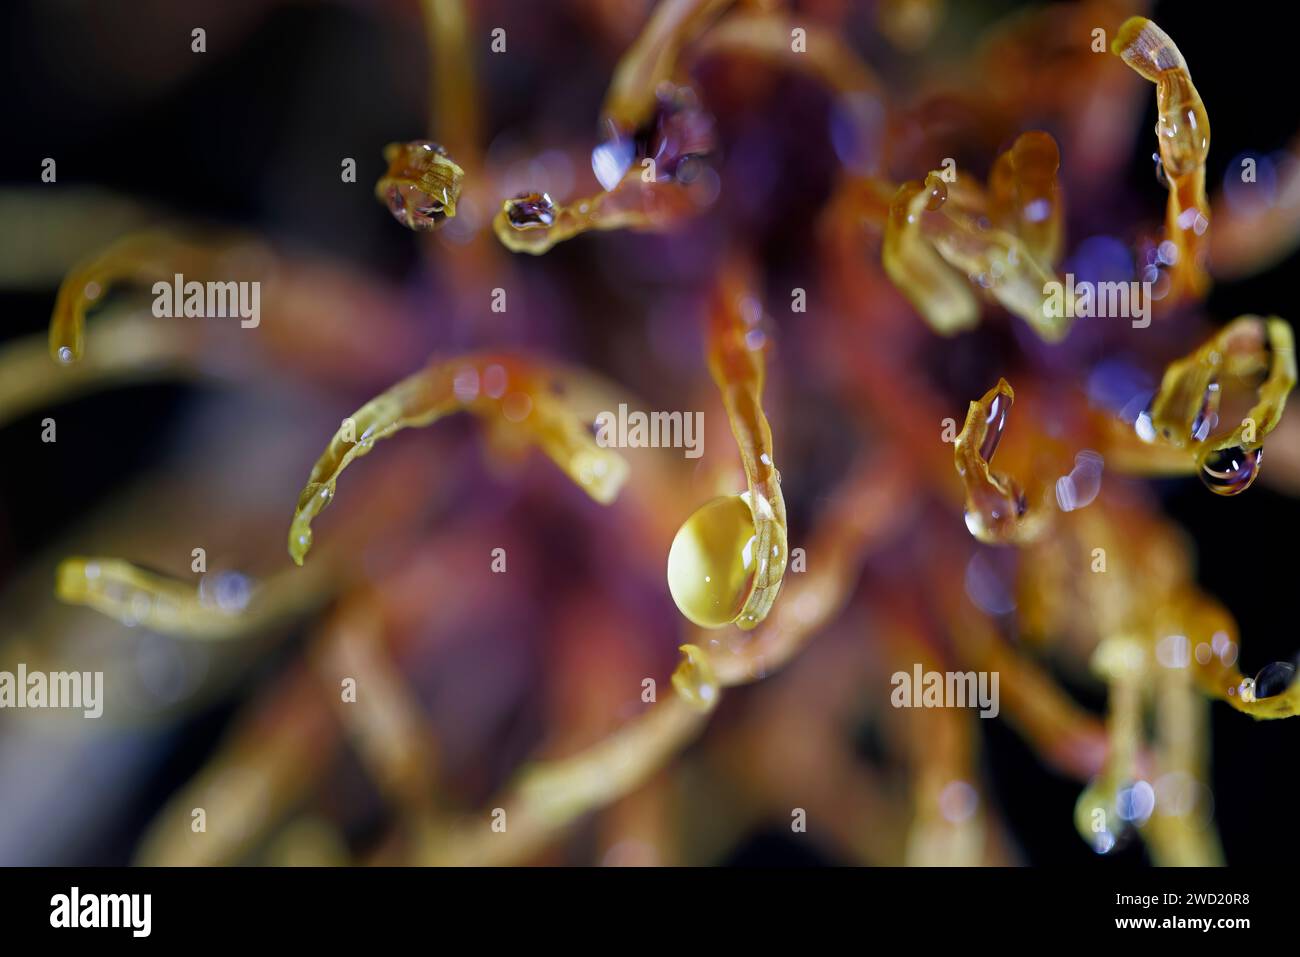 witch hazel flower with water drops on petals Stock Photo